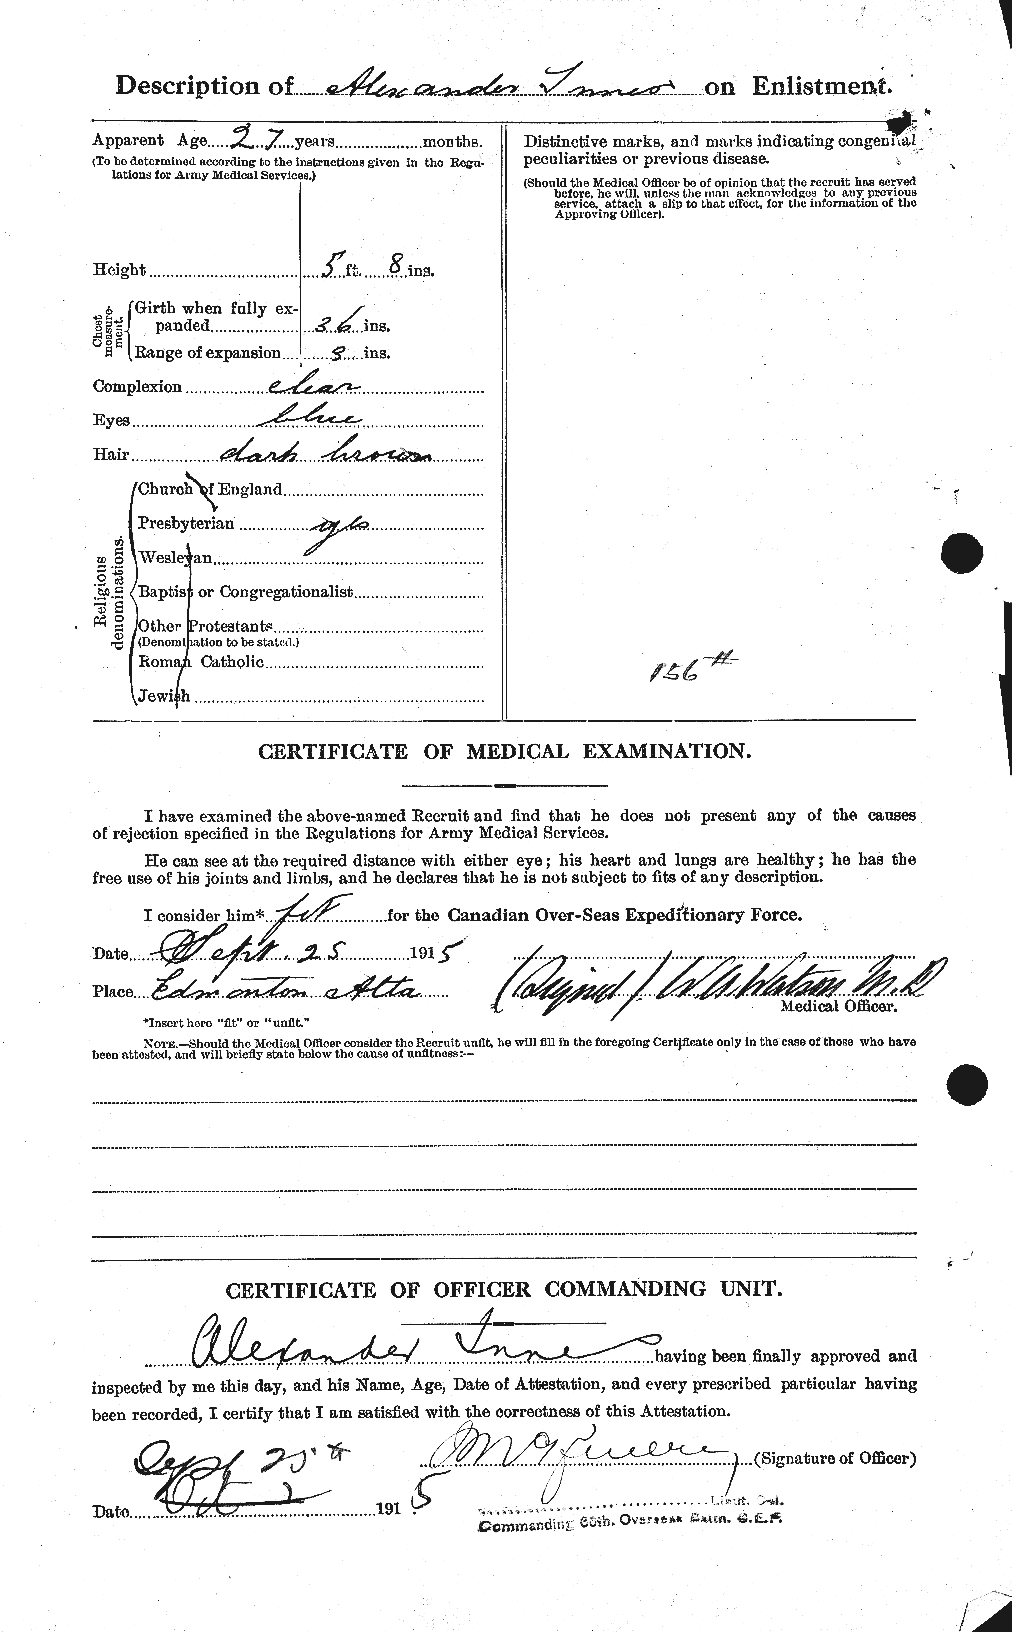 Personnel Records of the First World War - CEF 415376b